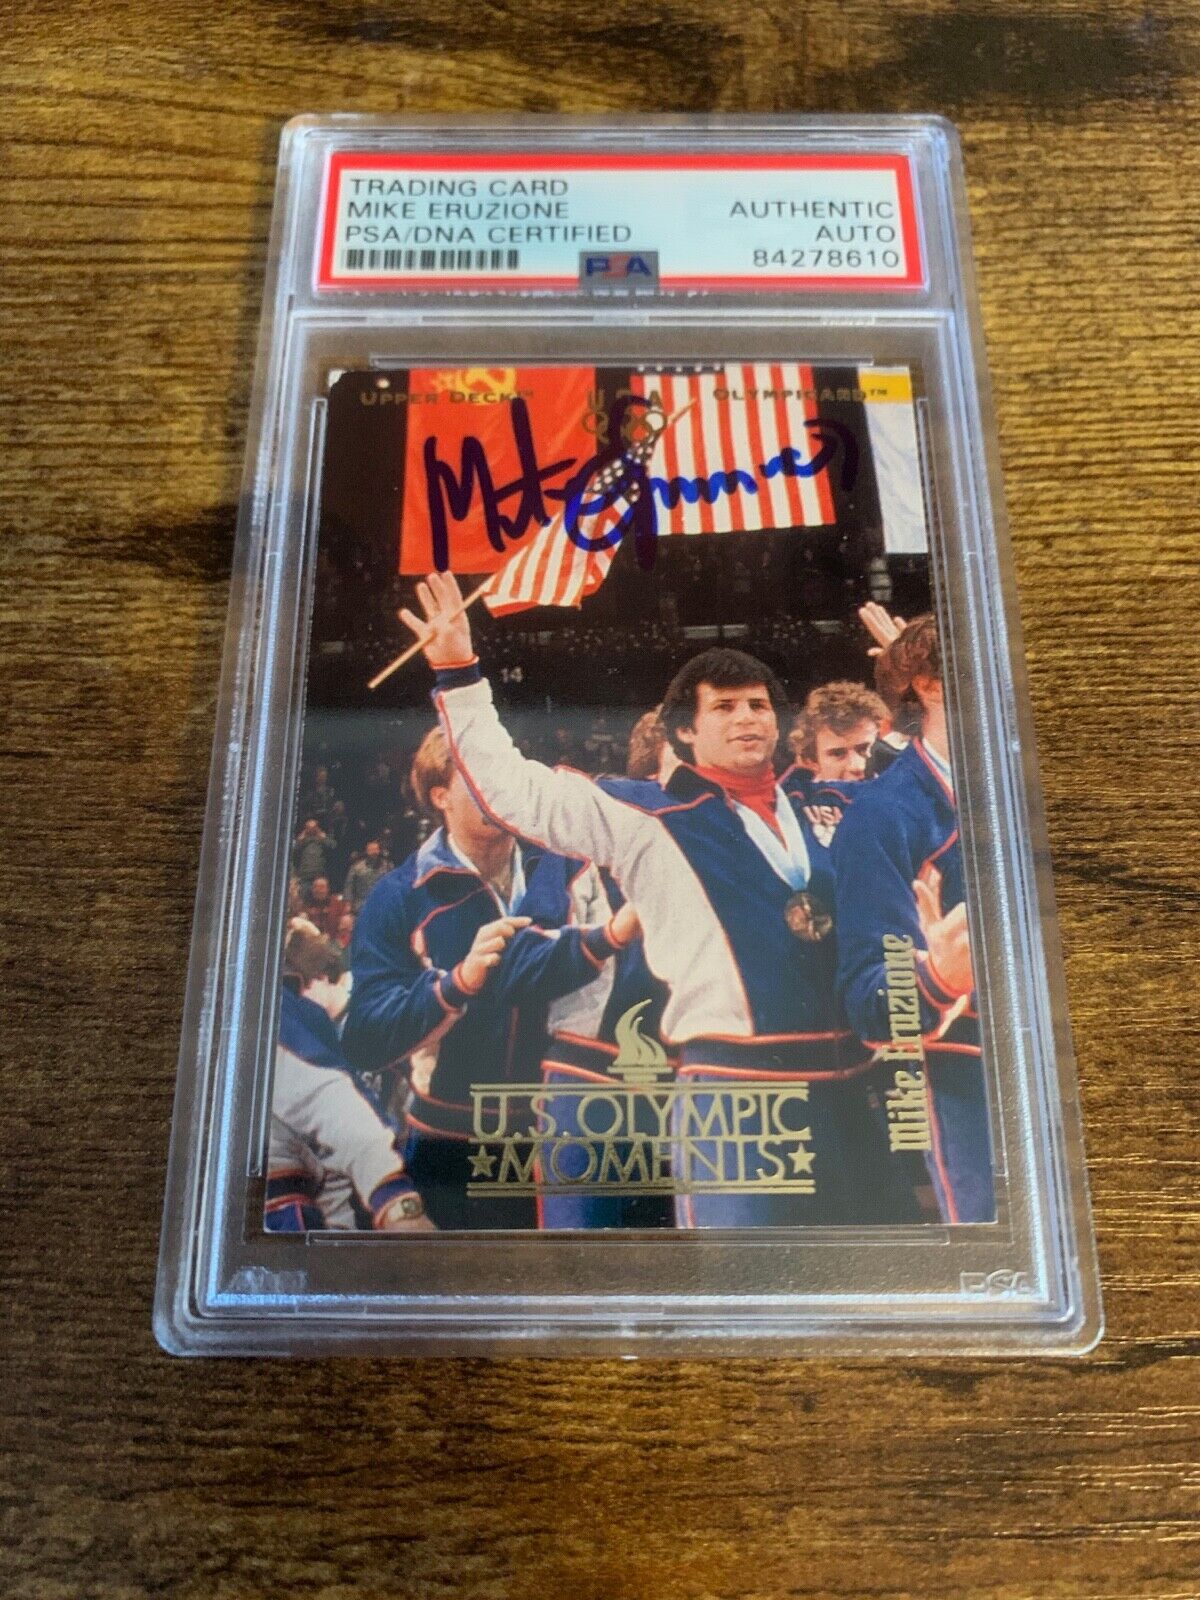 Mike Eruzione Autographed Signed Upper Deck Olympic Card PSA Certified Slabbed